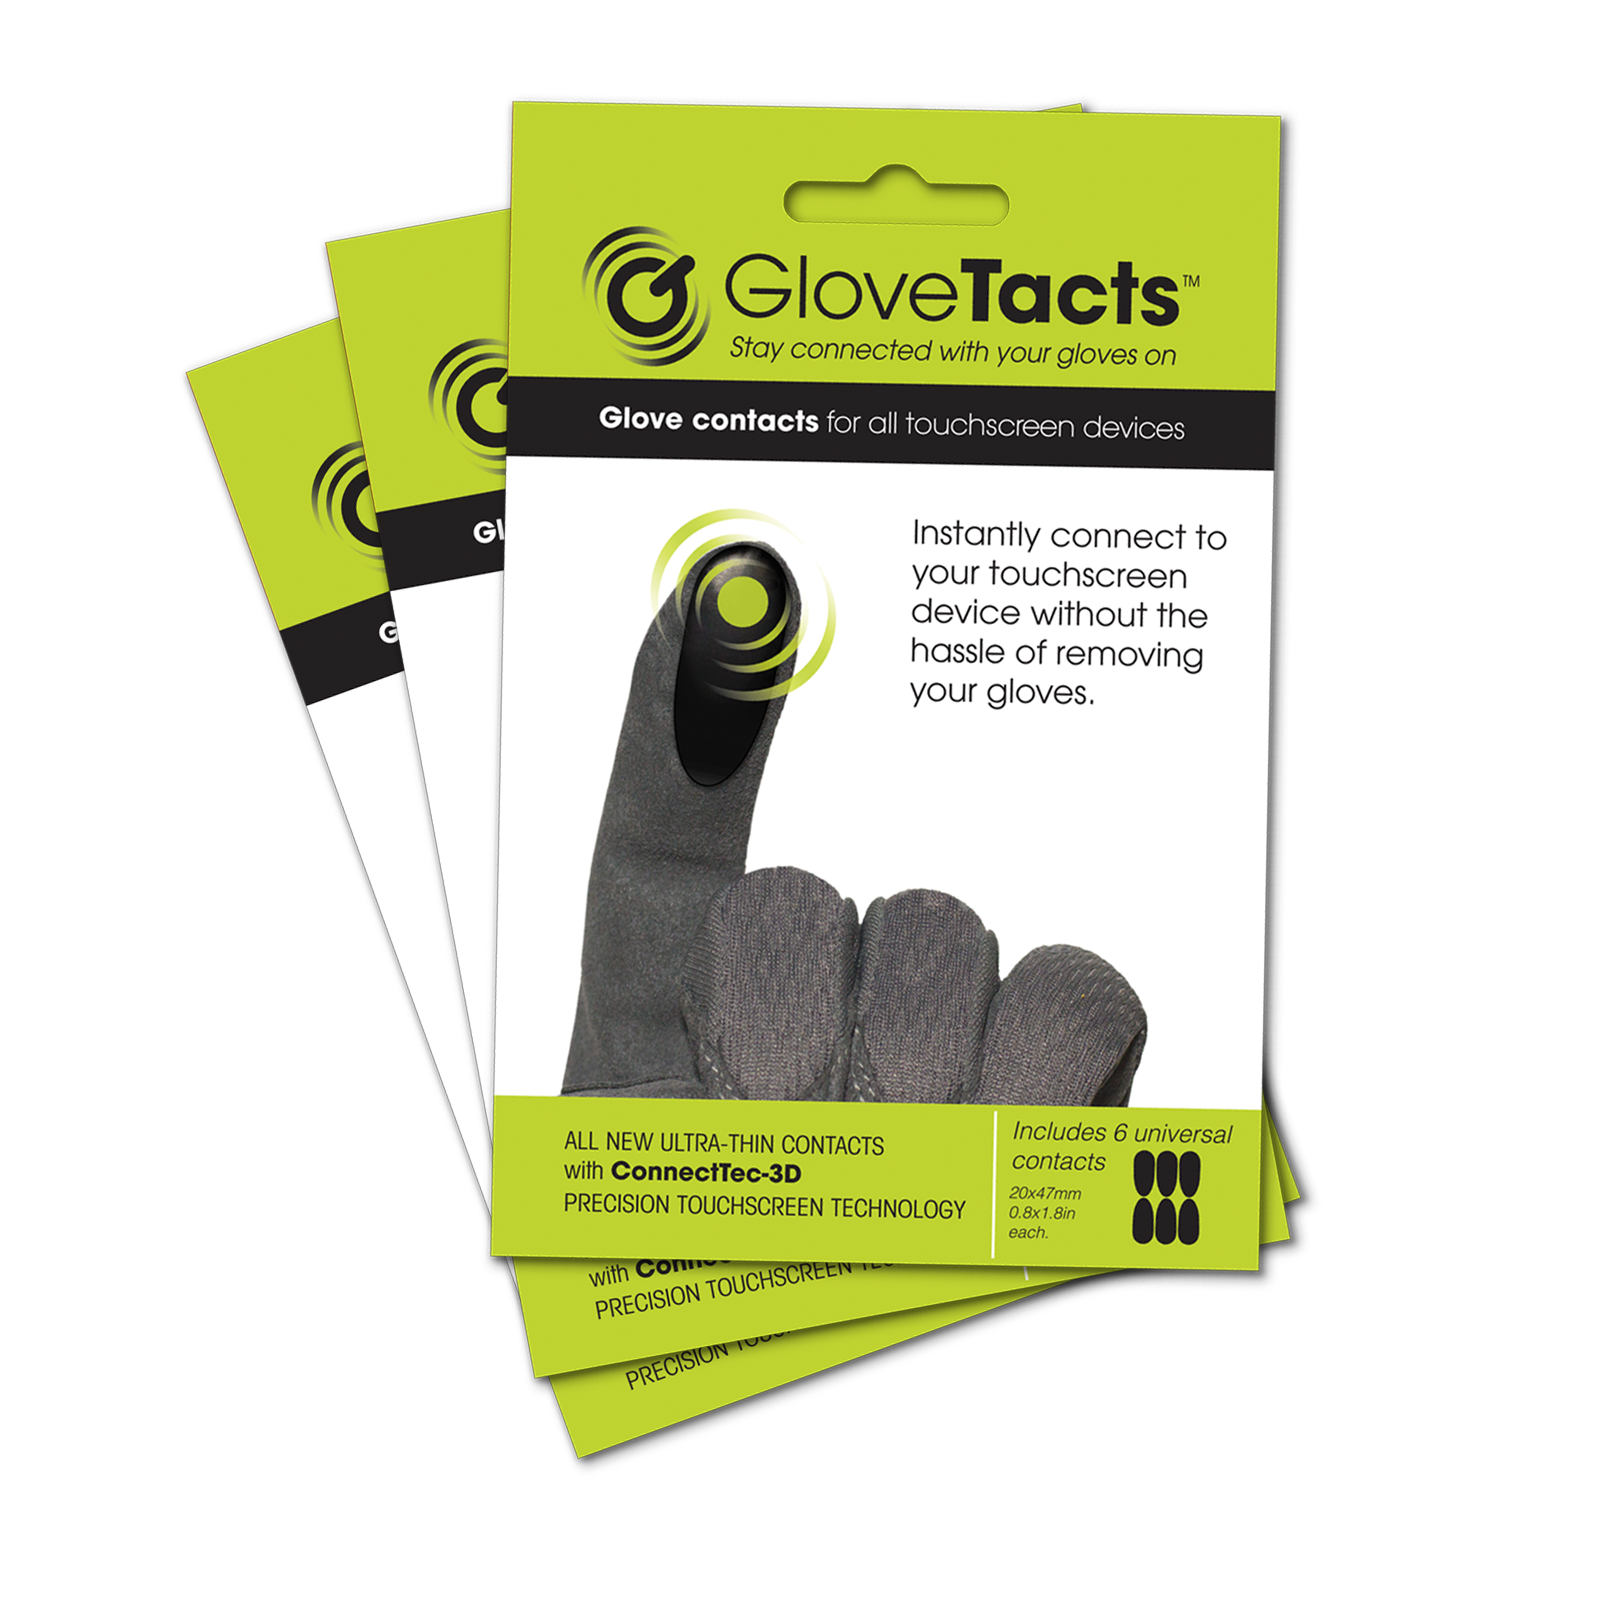 3 Pack of GloveTacts Conductive Stickers - 18 stickers and FREE SHIPPING